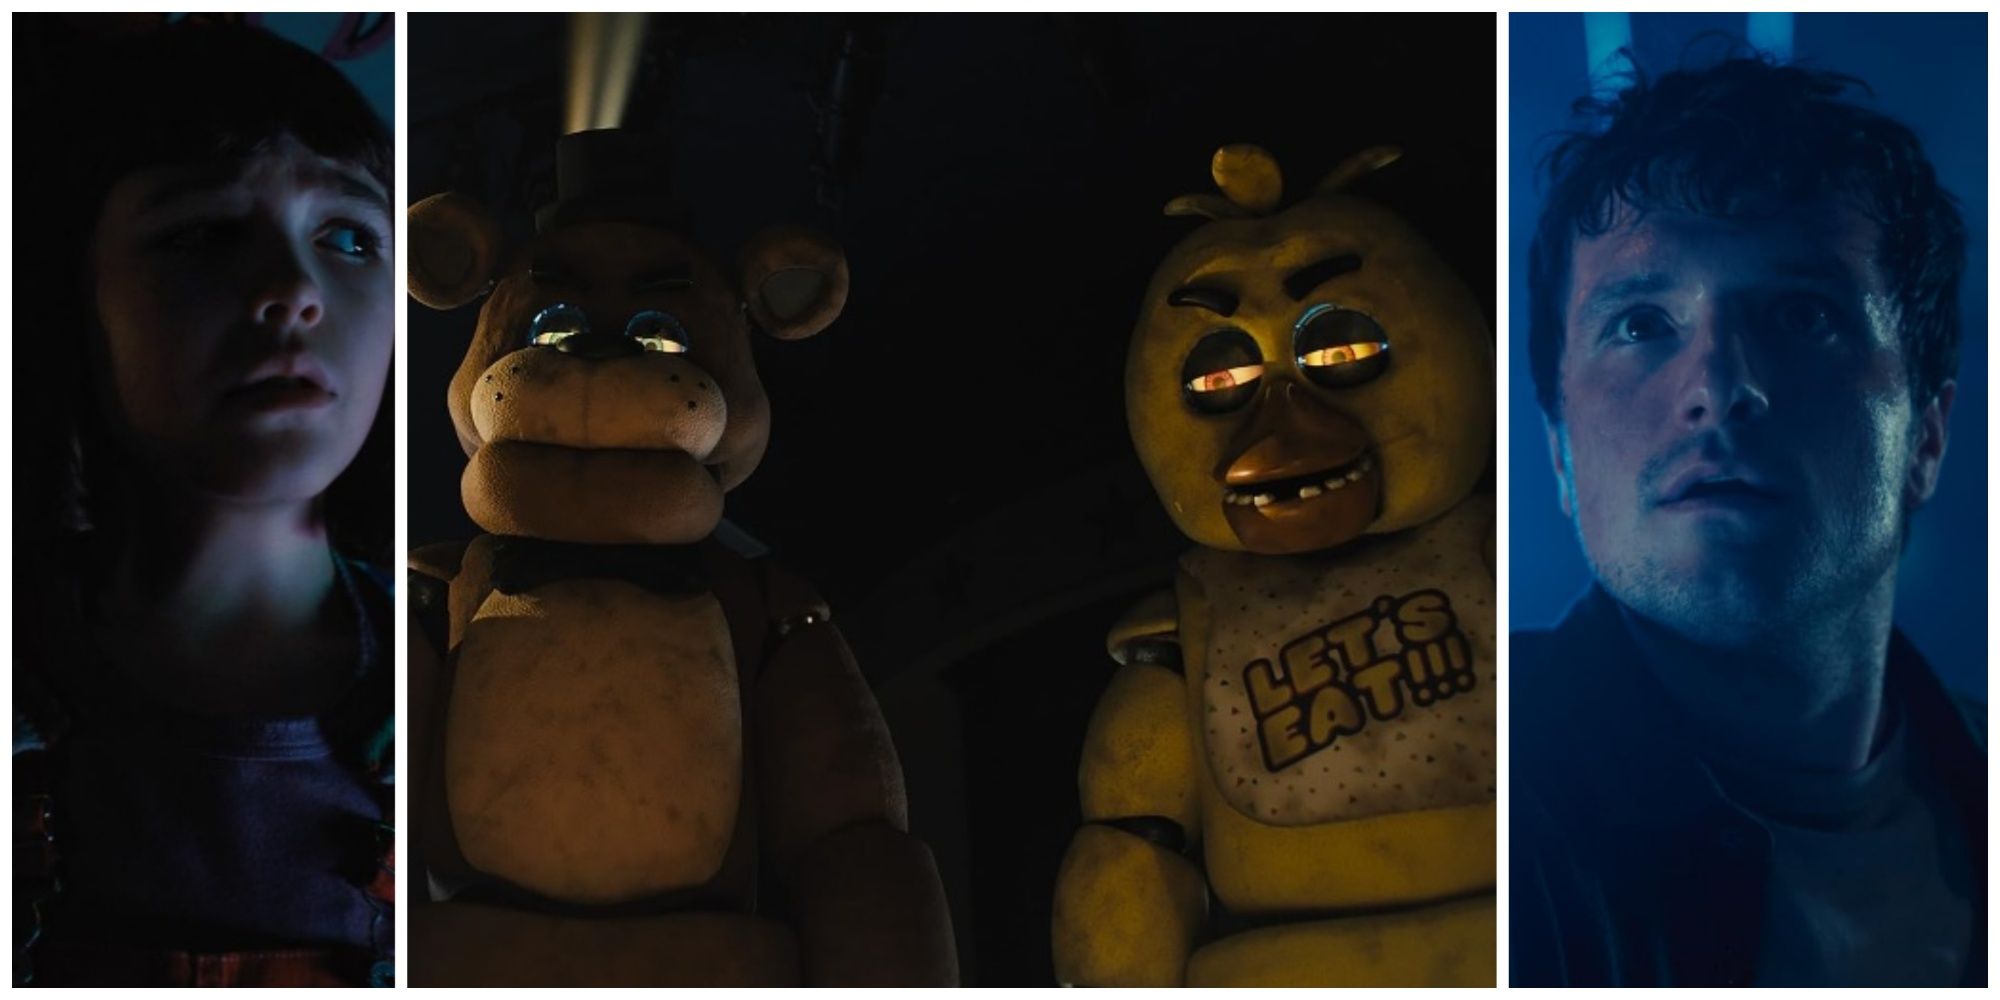 Why is the new five nights at Freddy's movie getting so much hate